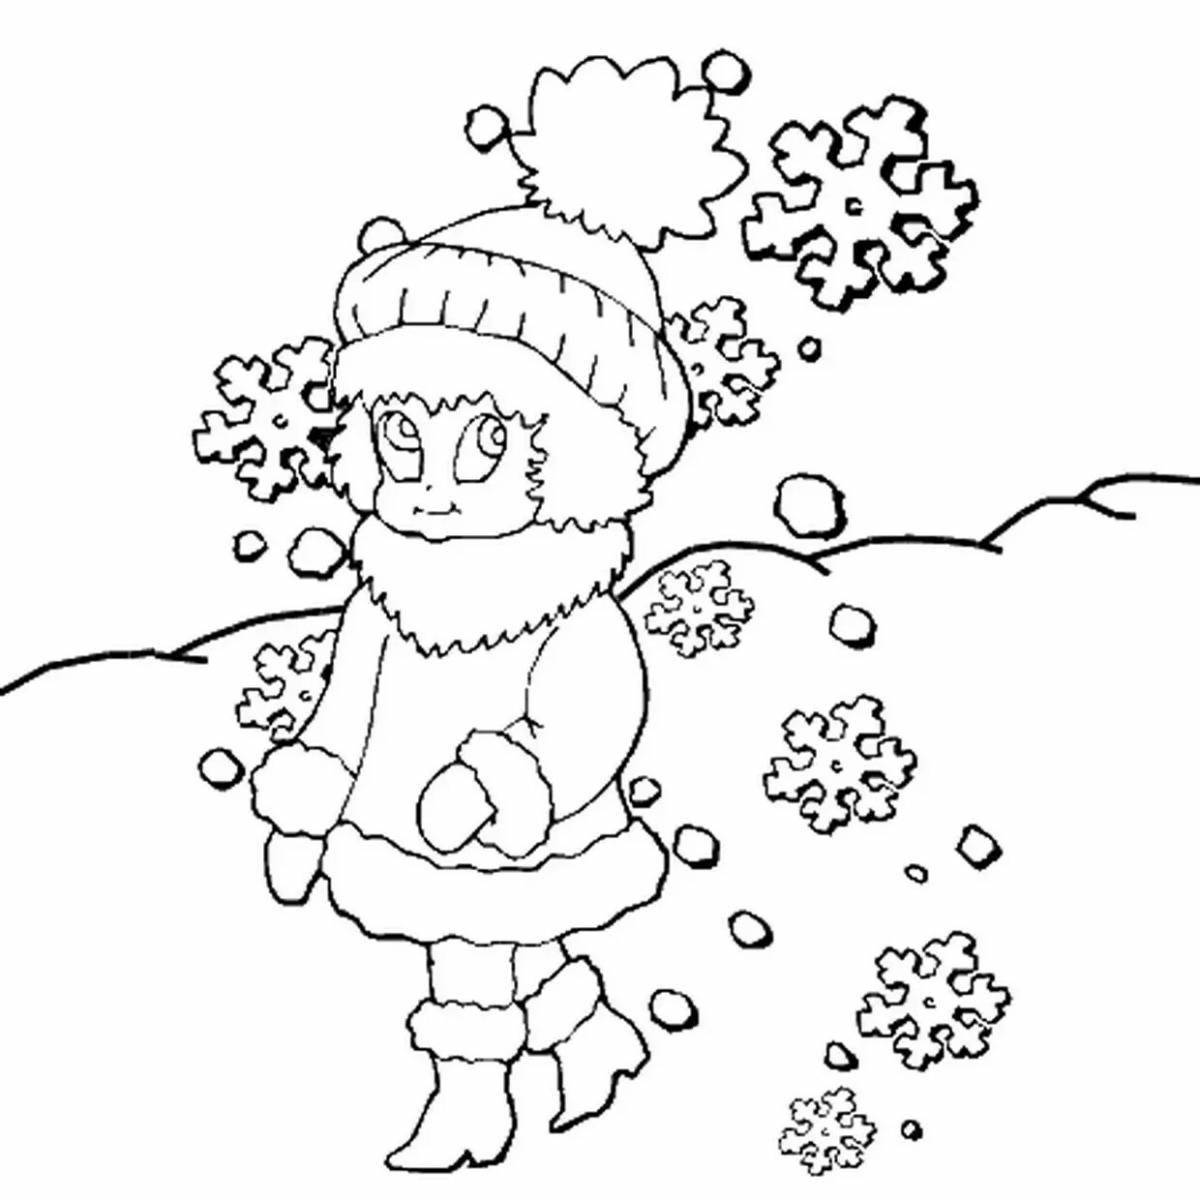 Fantastic first snow coloring book